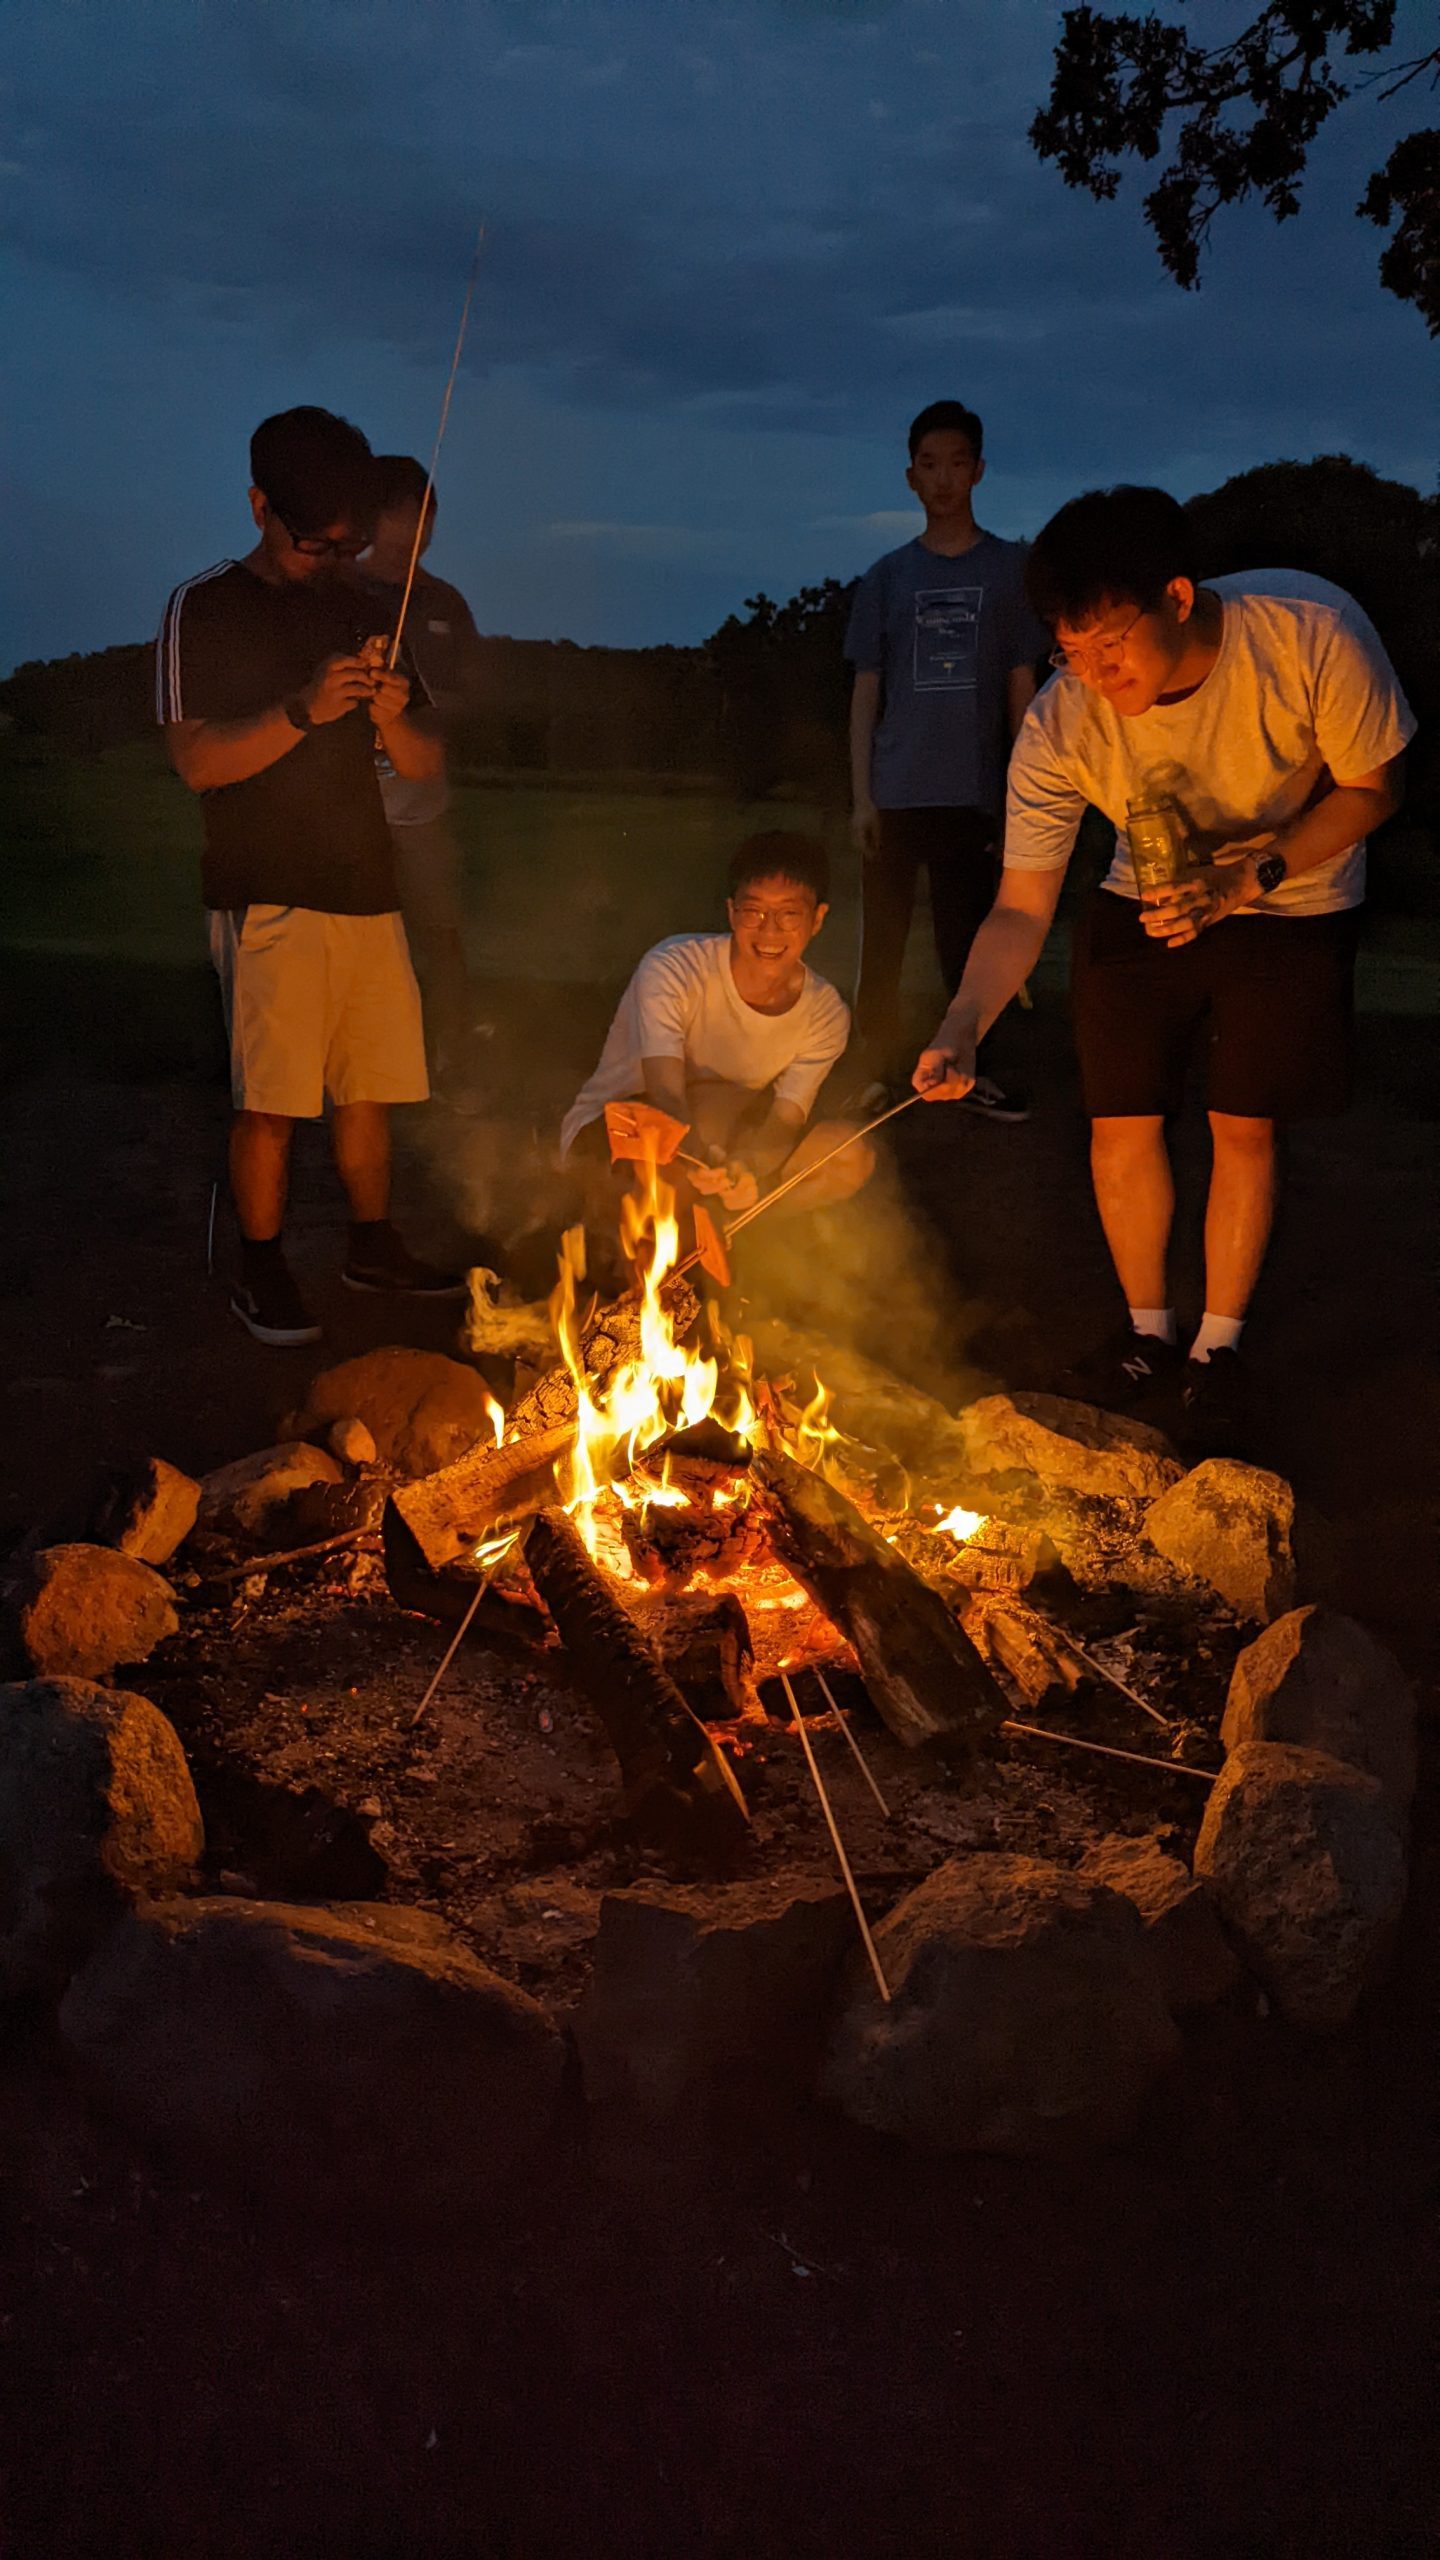 Two students crouch down by a campfire at night. They are holding sticks and roasting marshmallows over the fire.